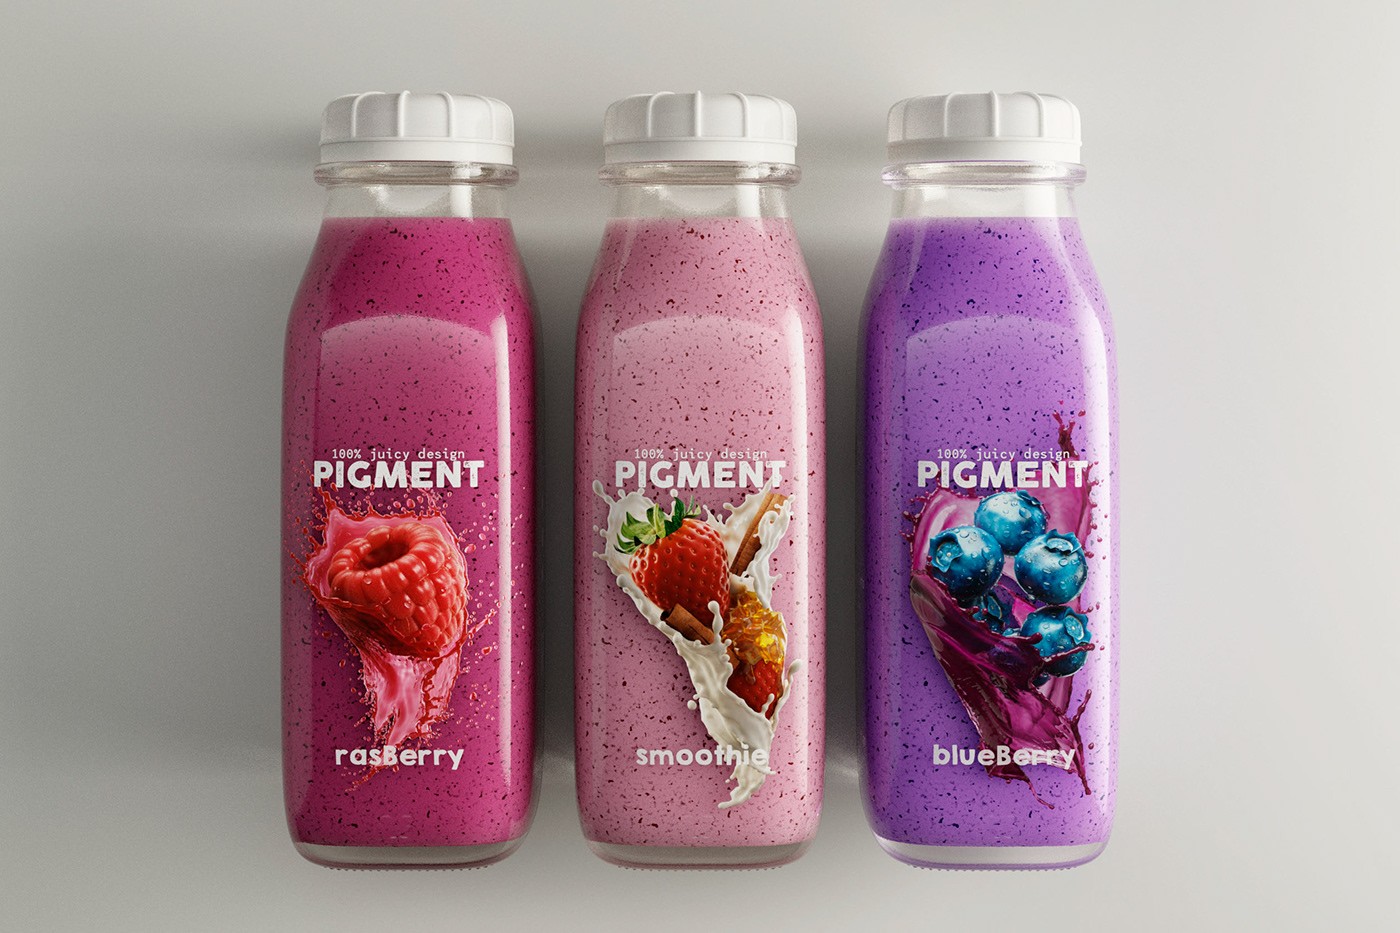 Pigment-Ality a Juicy Fruits Mix Label Design From Greece